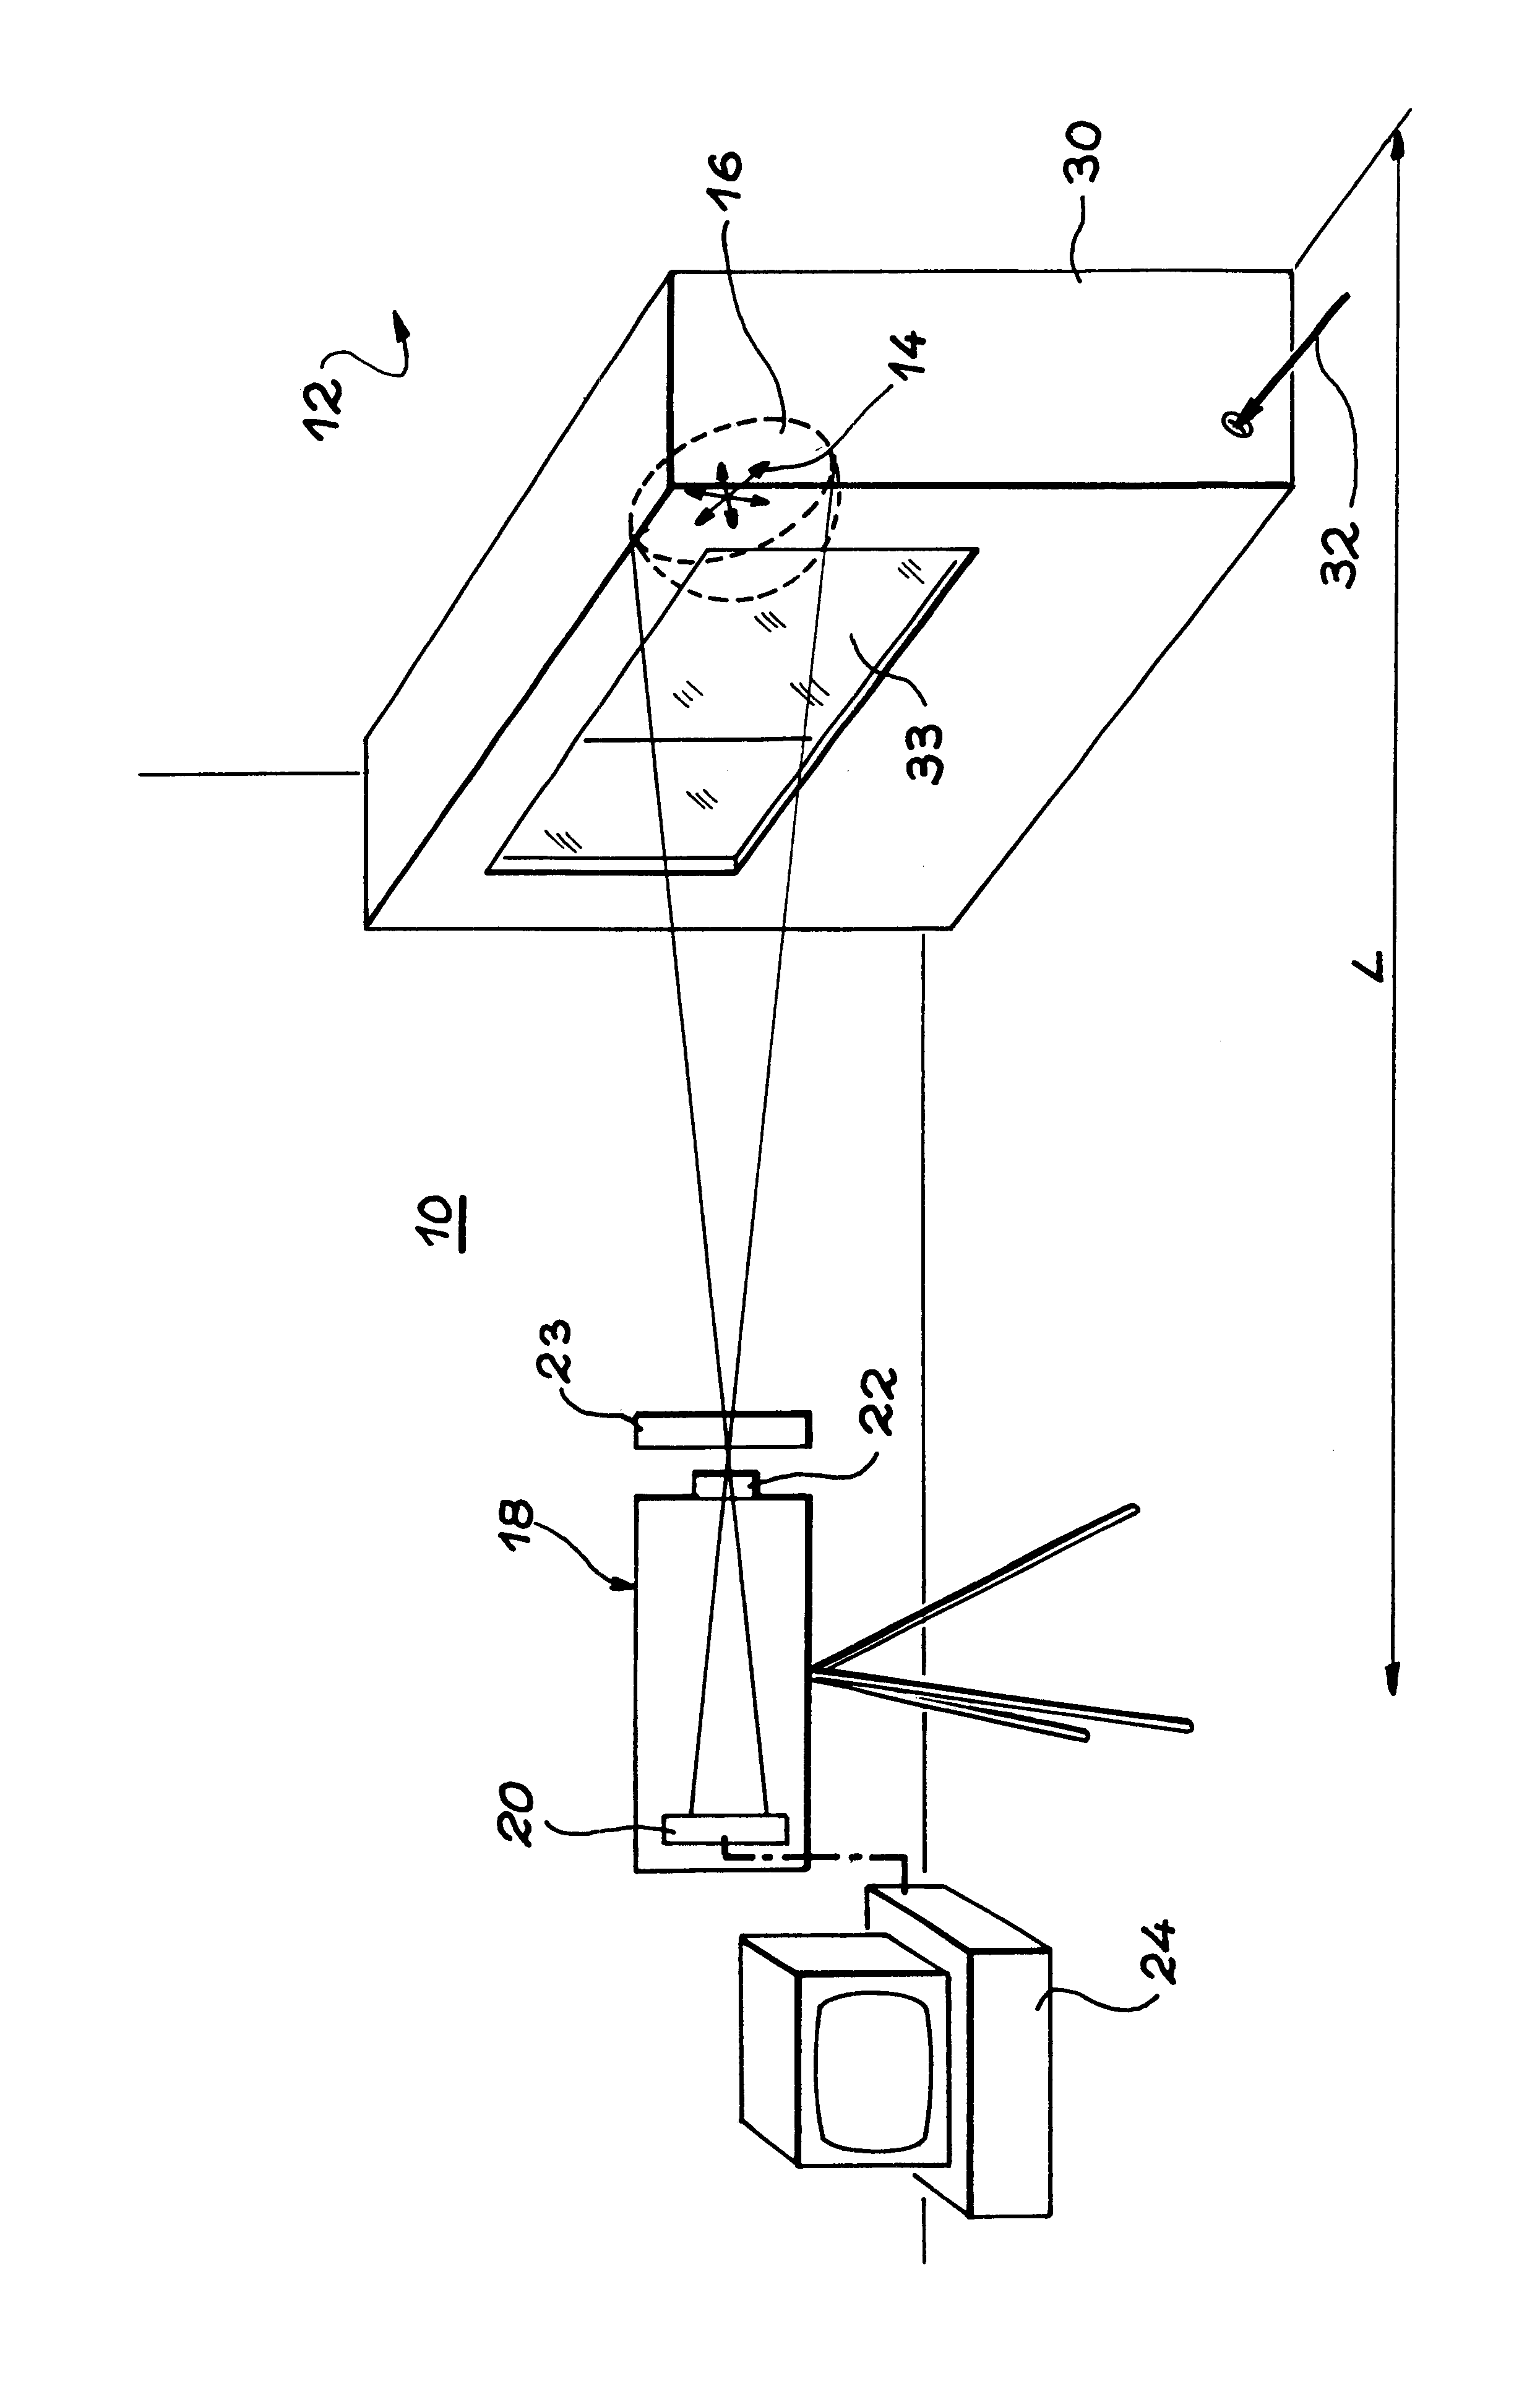 Remote alphasource location device and method